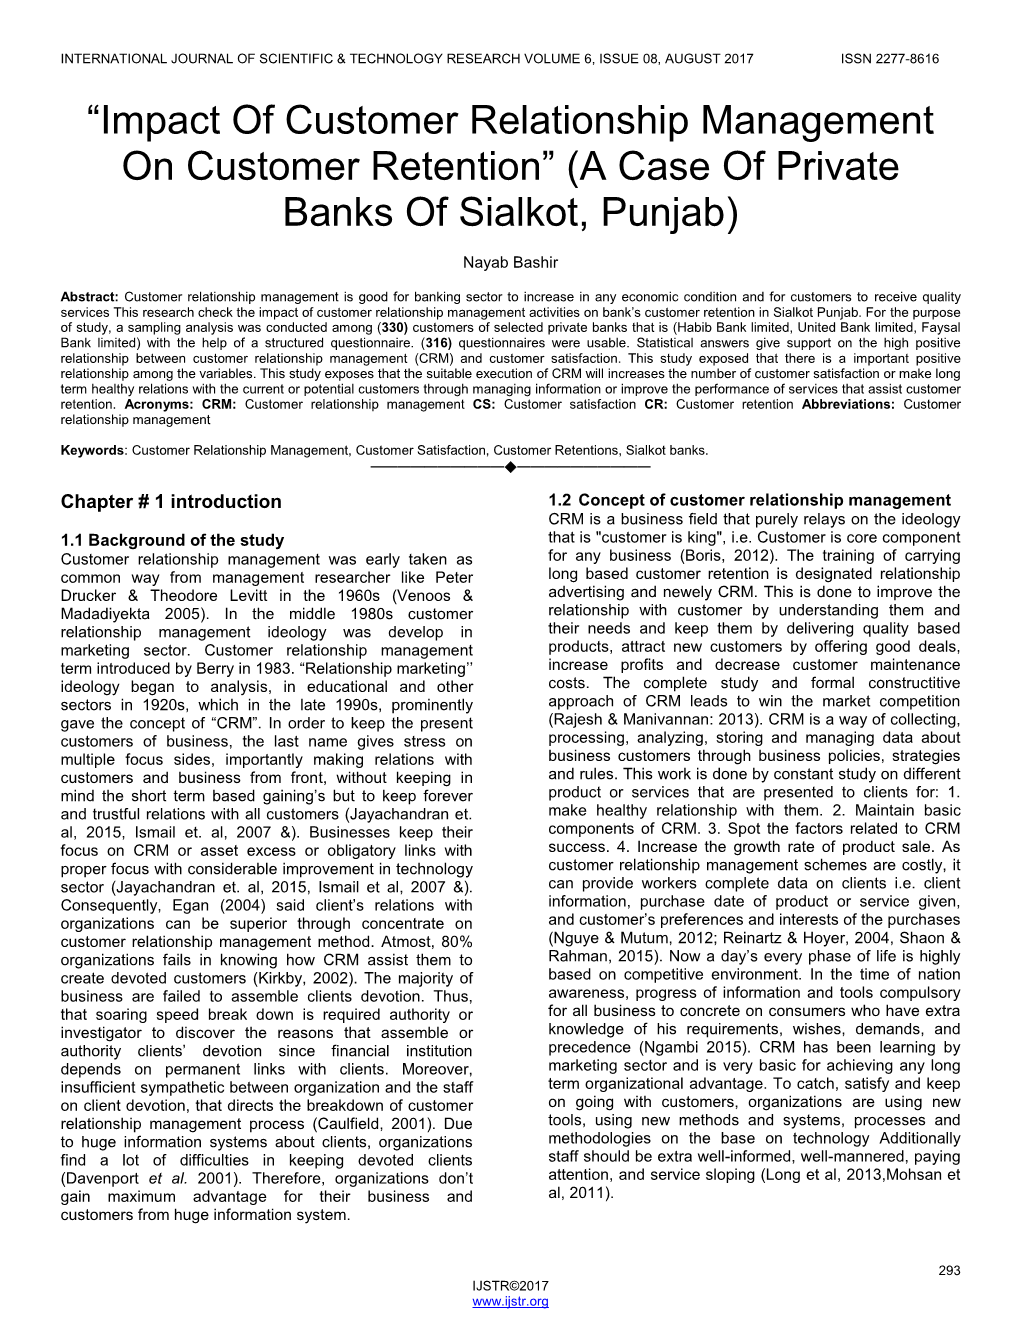 Impact of Customer Relationship Management on Customer Retention” (A Case of Private Banks of Sialkot, Punjab)